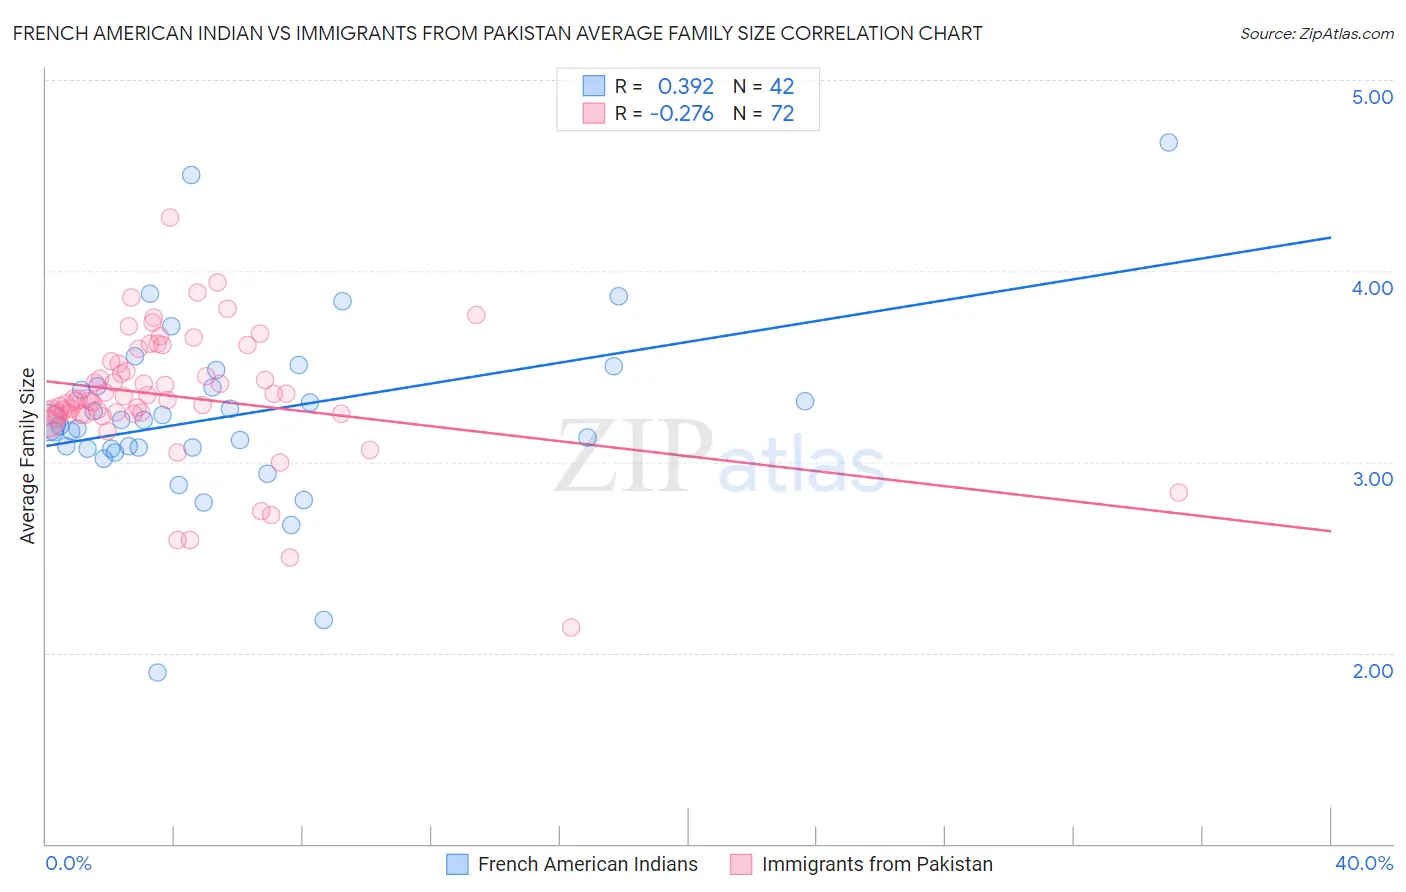 French American Indian vs Immigrants from Pakistan Average Family Size